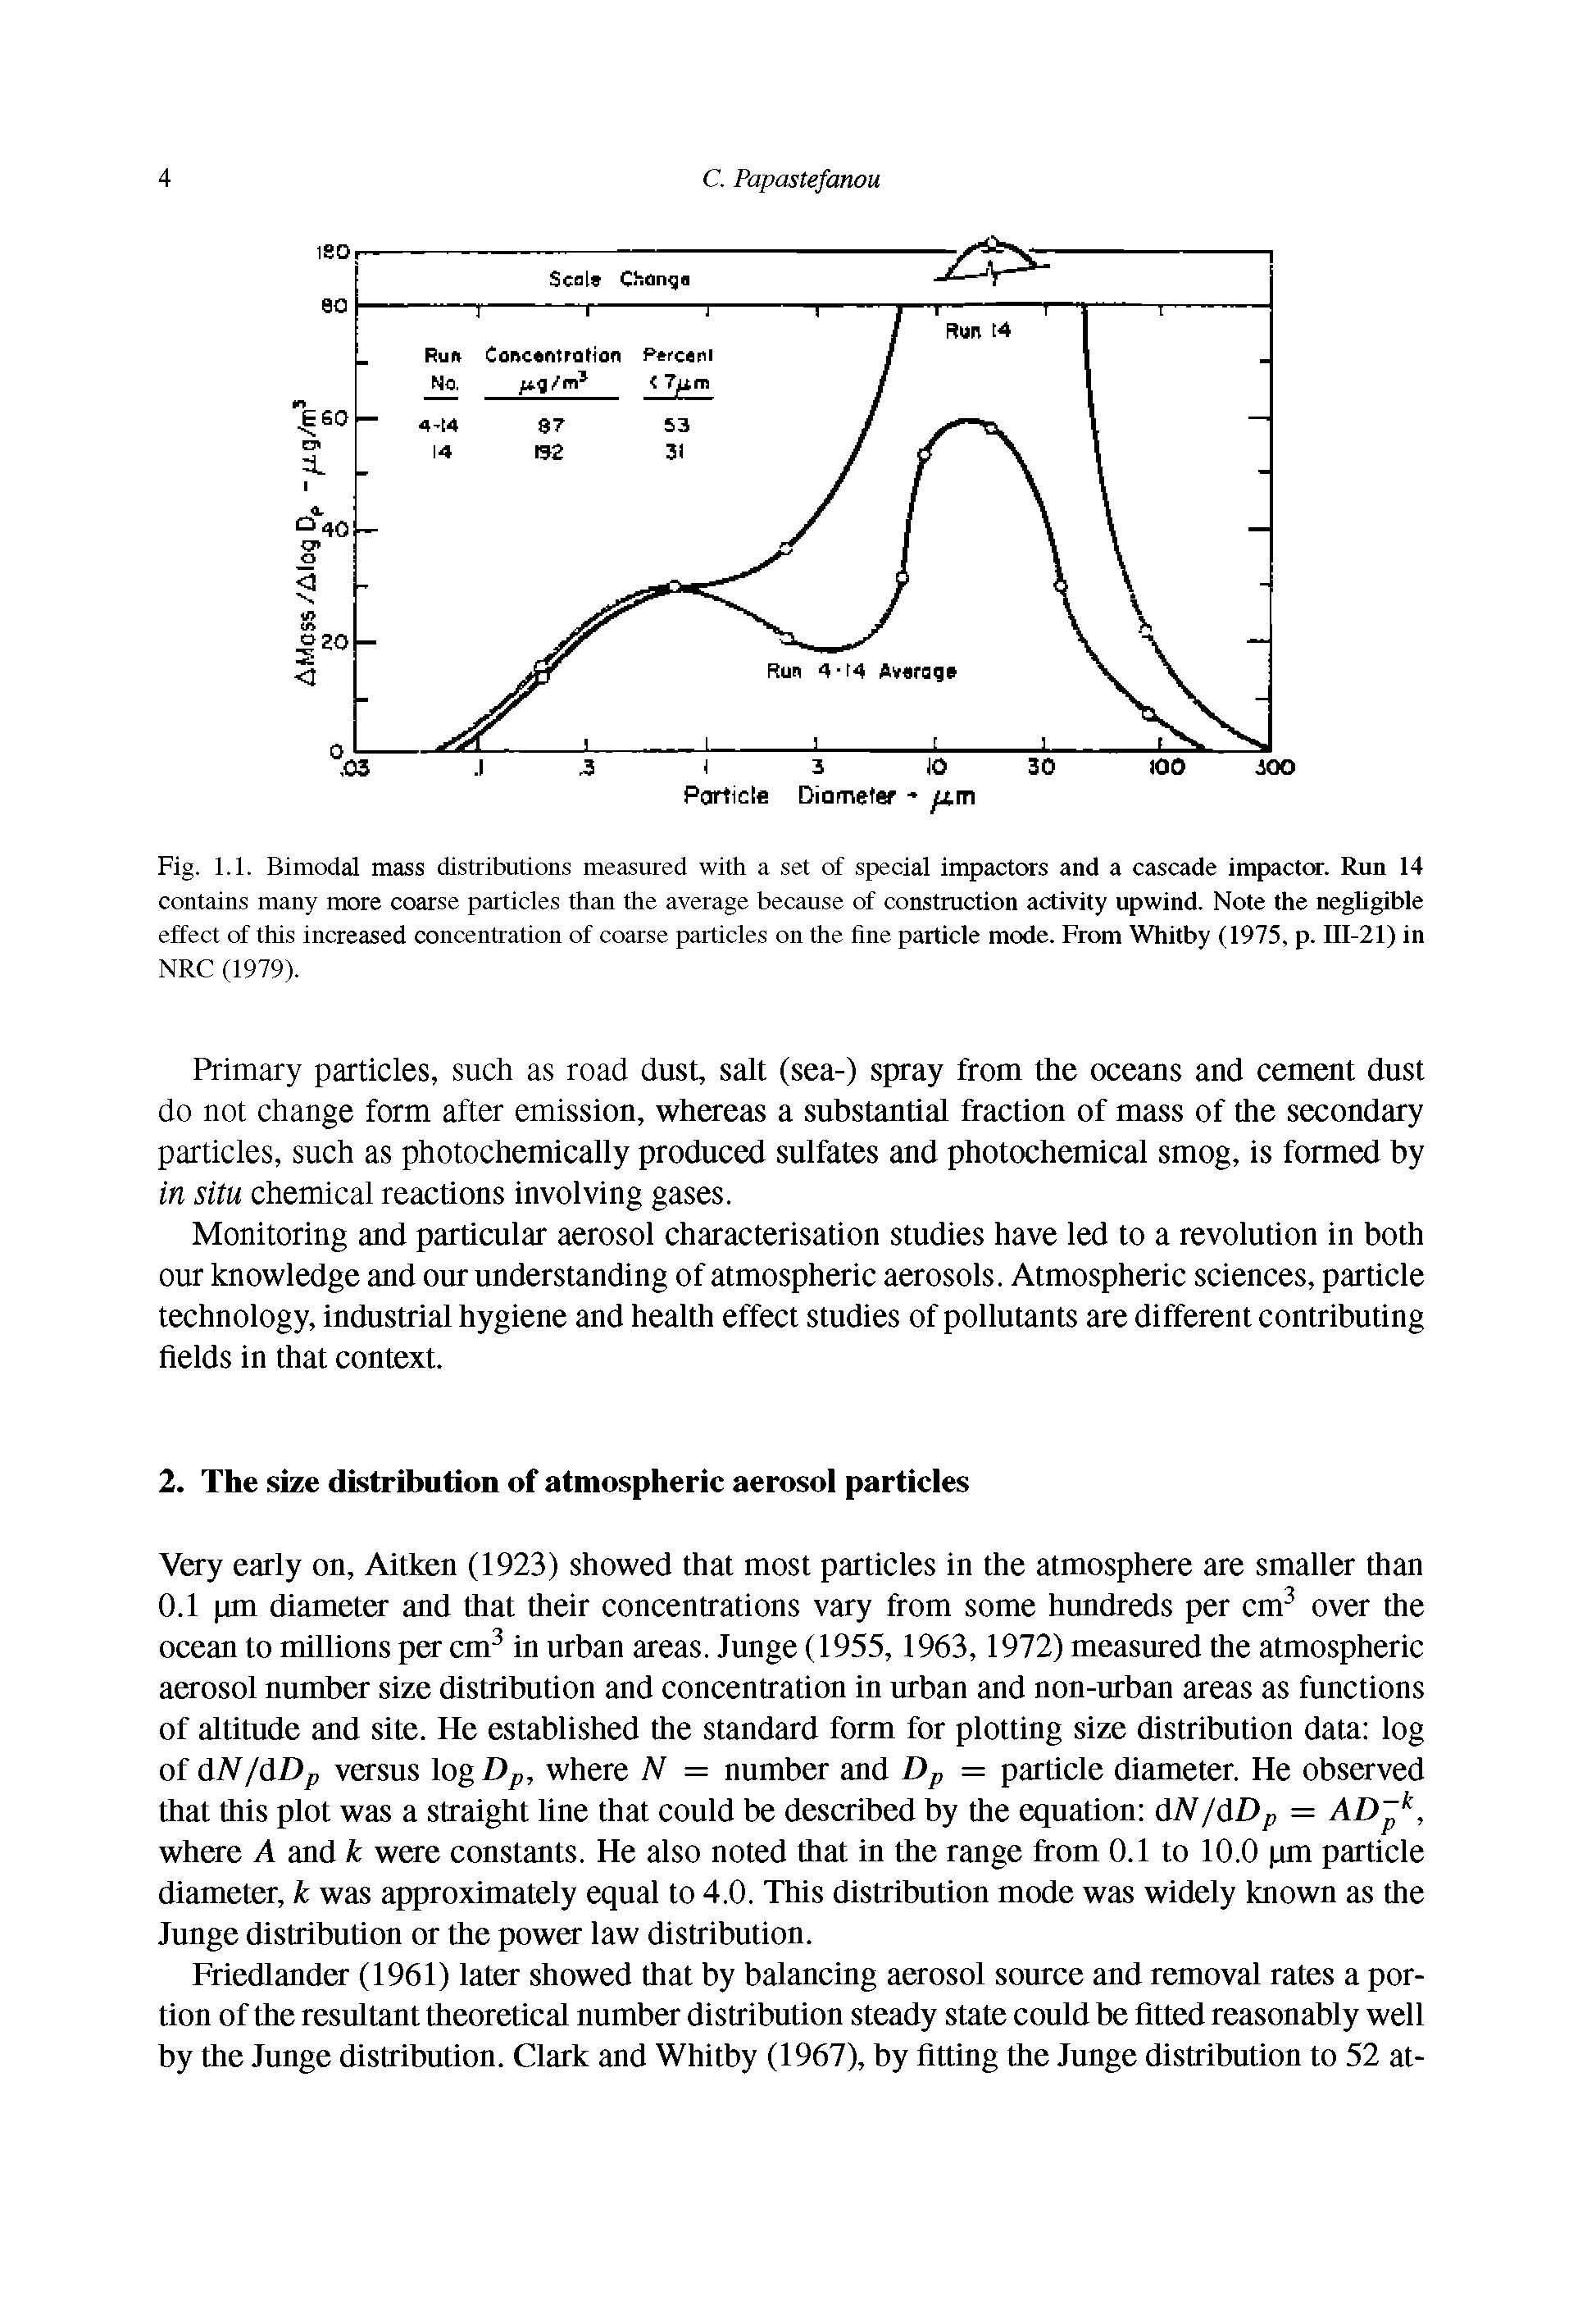 Fig. 1.1. Bimodal mass distributions measured with a set of special impactors and a cascade impactor. Run 14 contains many more coarse particles than the average because of construction activity upwind. Note the negligible effect of this increased concentration of coarse particles on the tine particle mode. From Whitby (1975, p. 111-21) in NRC (1979).